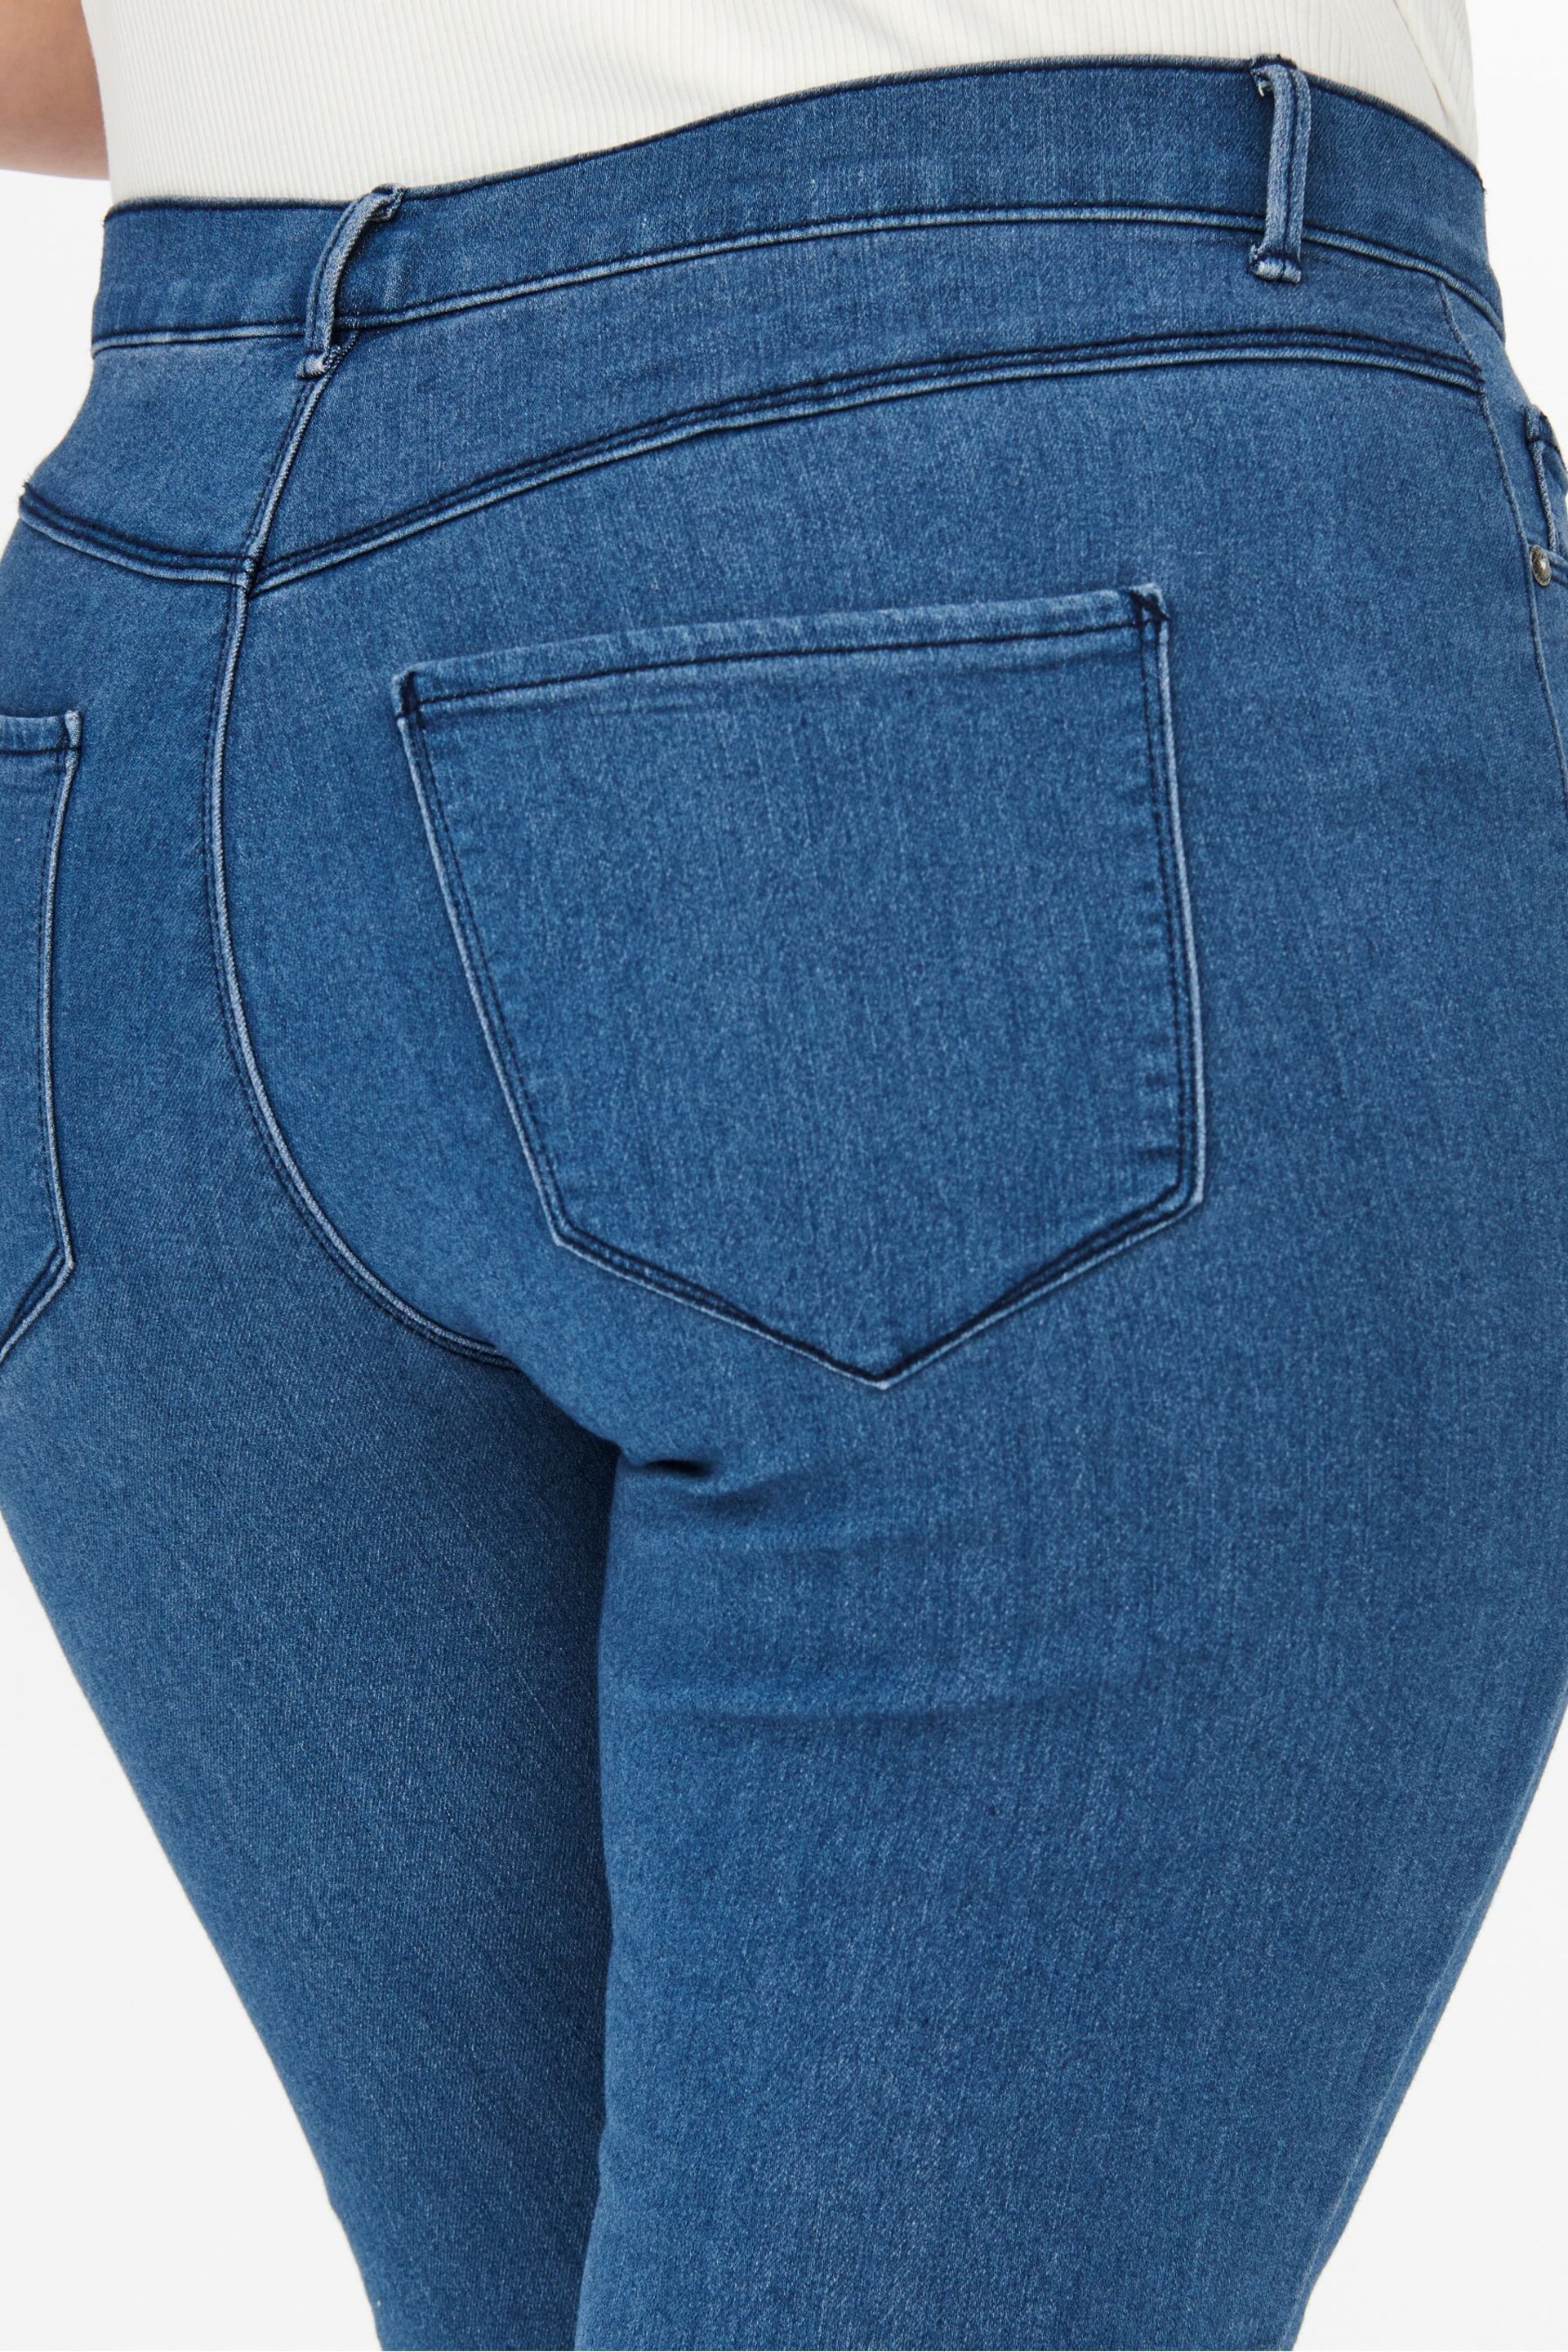 ONLY Curve Light Blue Push Up Sculpting Skinny Jeans - Image 6 of 8